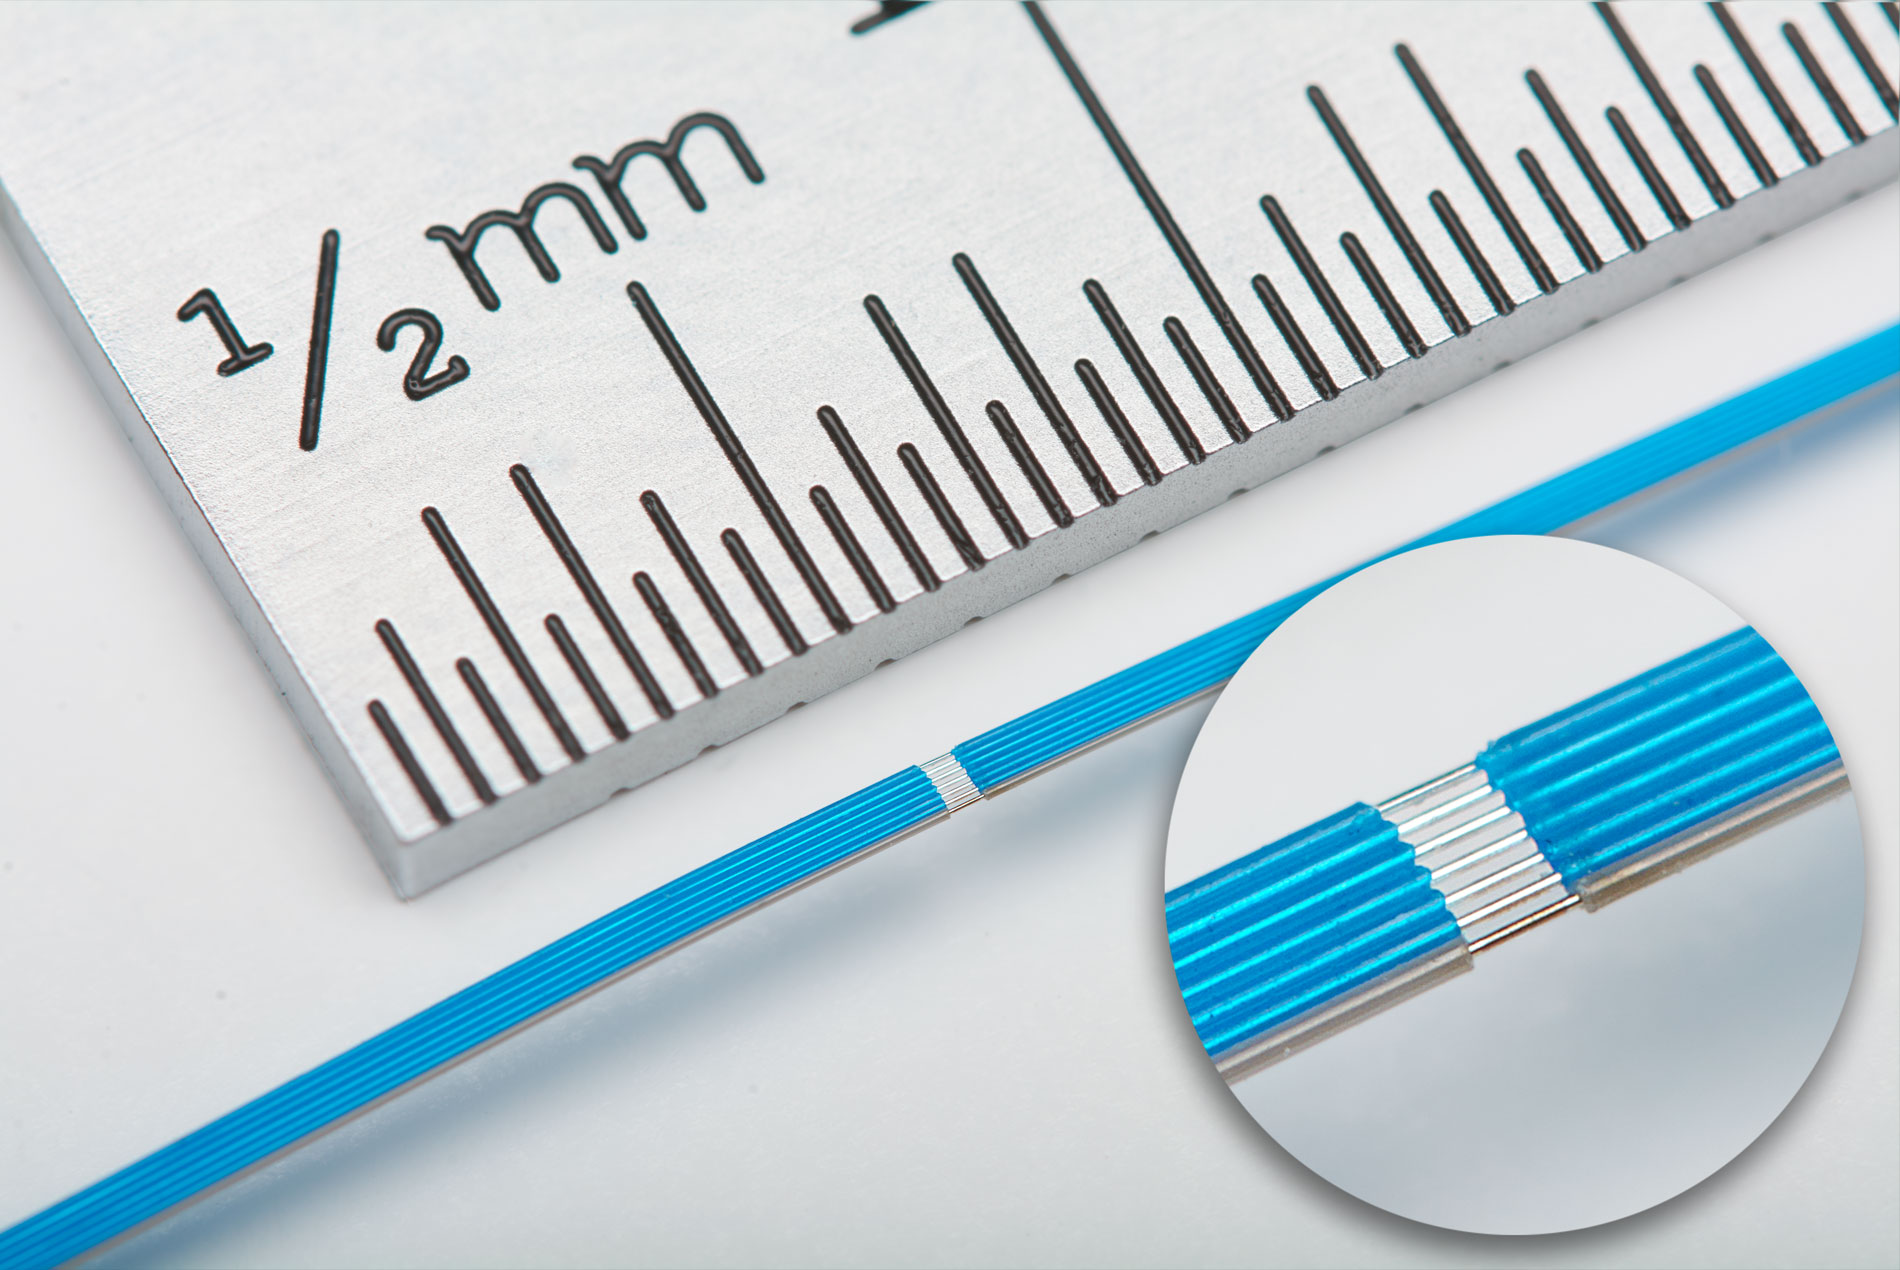 microwire against metric ruler photo